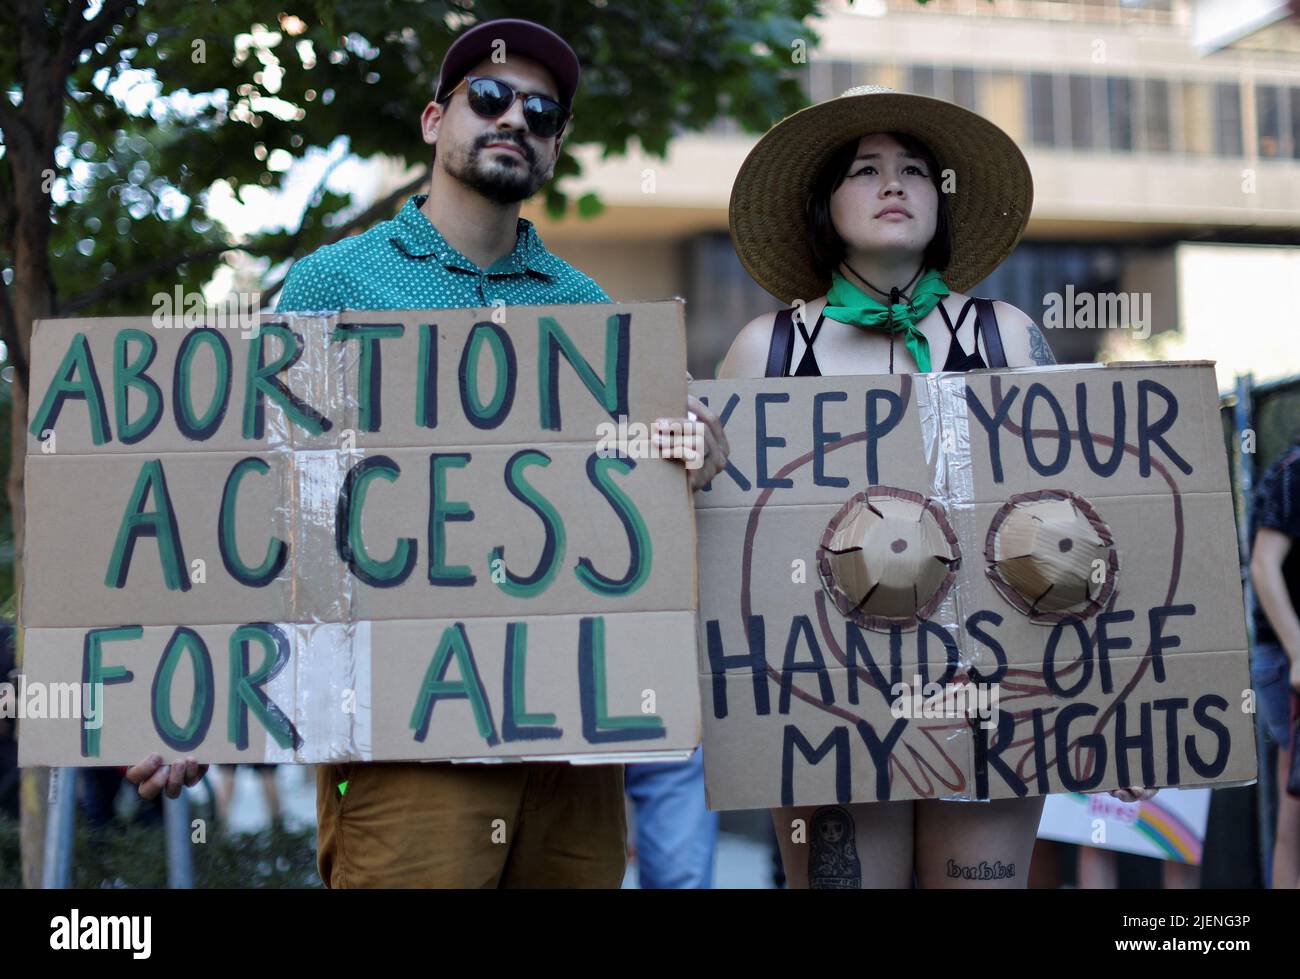 Kimberly Wildgor 29, and Steven Wildgor 28, hold signs during an abortion rights protest after the U.S. Supreme Court ruled in the Dobbs v Women’s Health Organization abortion case, overturning the landmark Roe v Wade abortion decision in Los Angeles, California, U.S., June 27, 2022. REUTERS/Lucy Nicholson Stock Photo